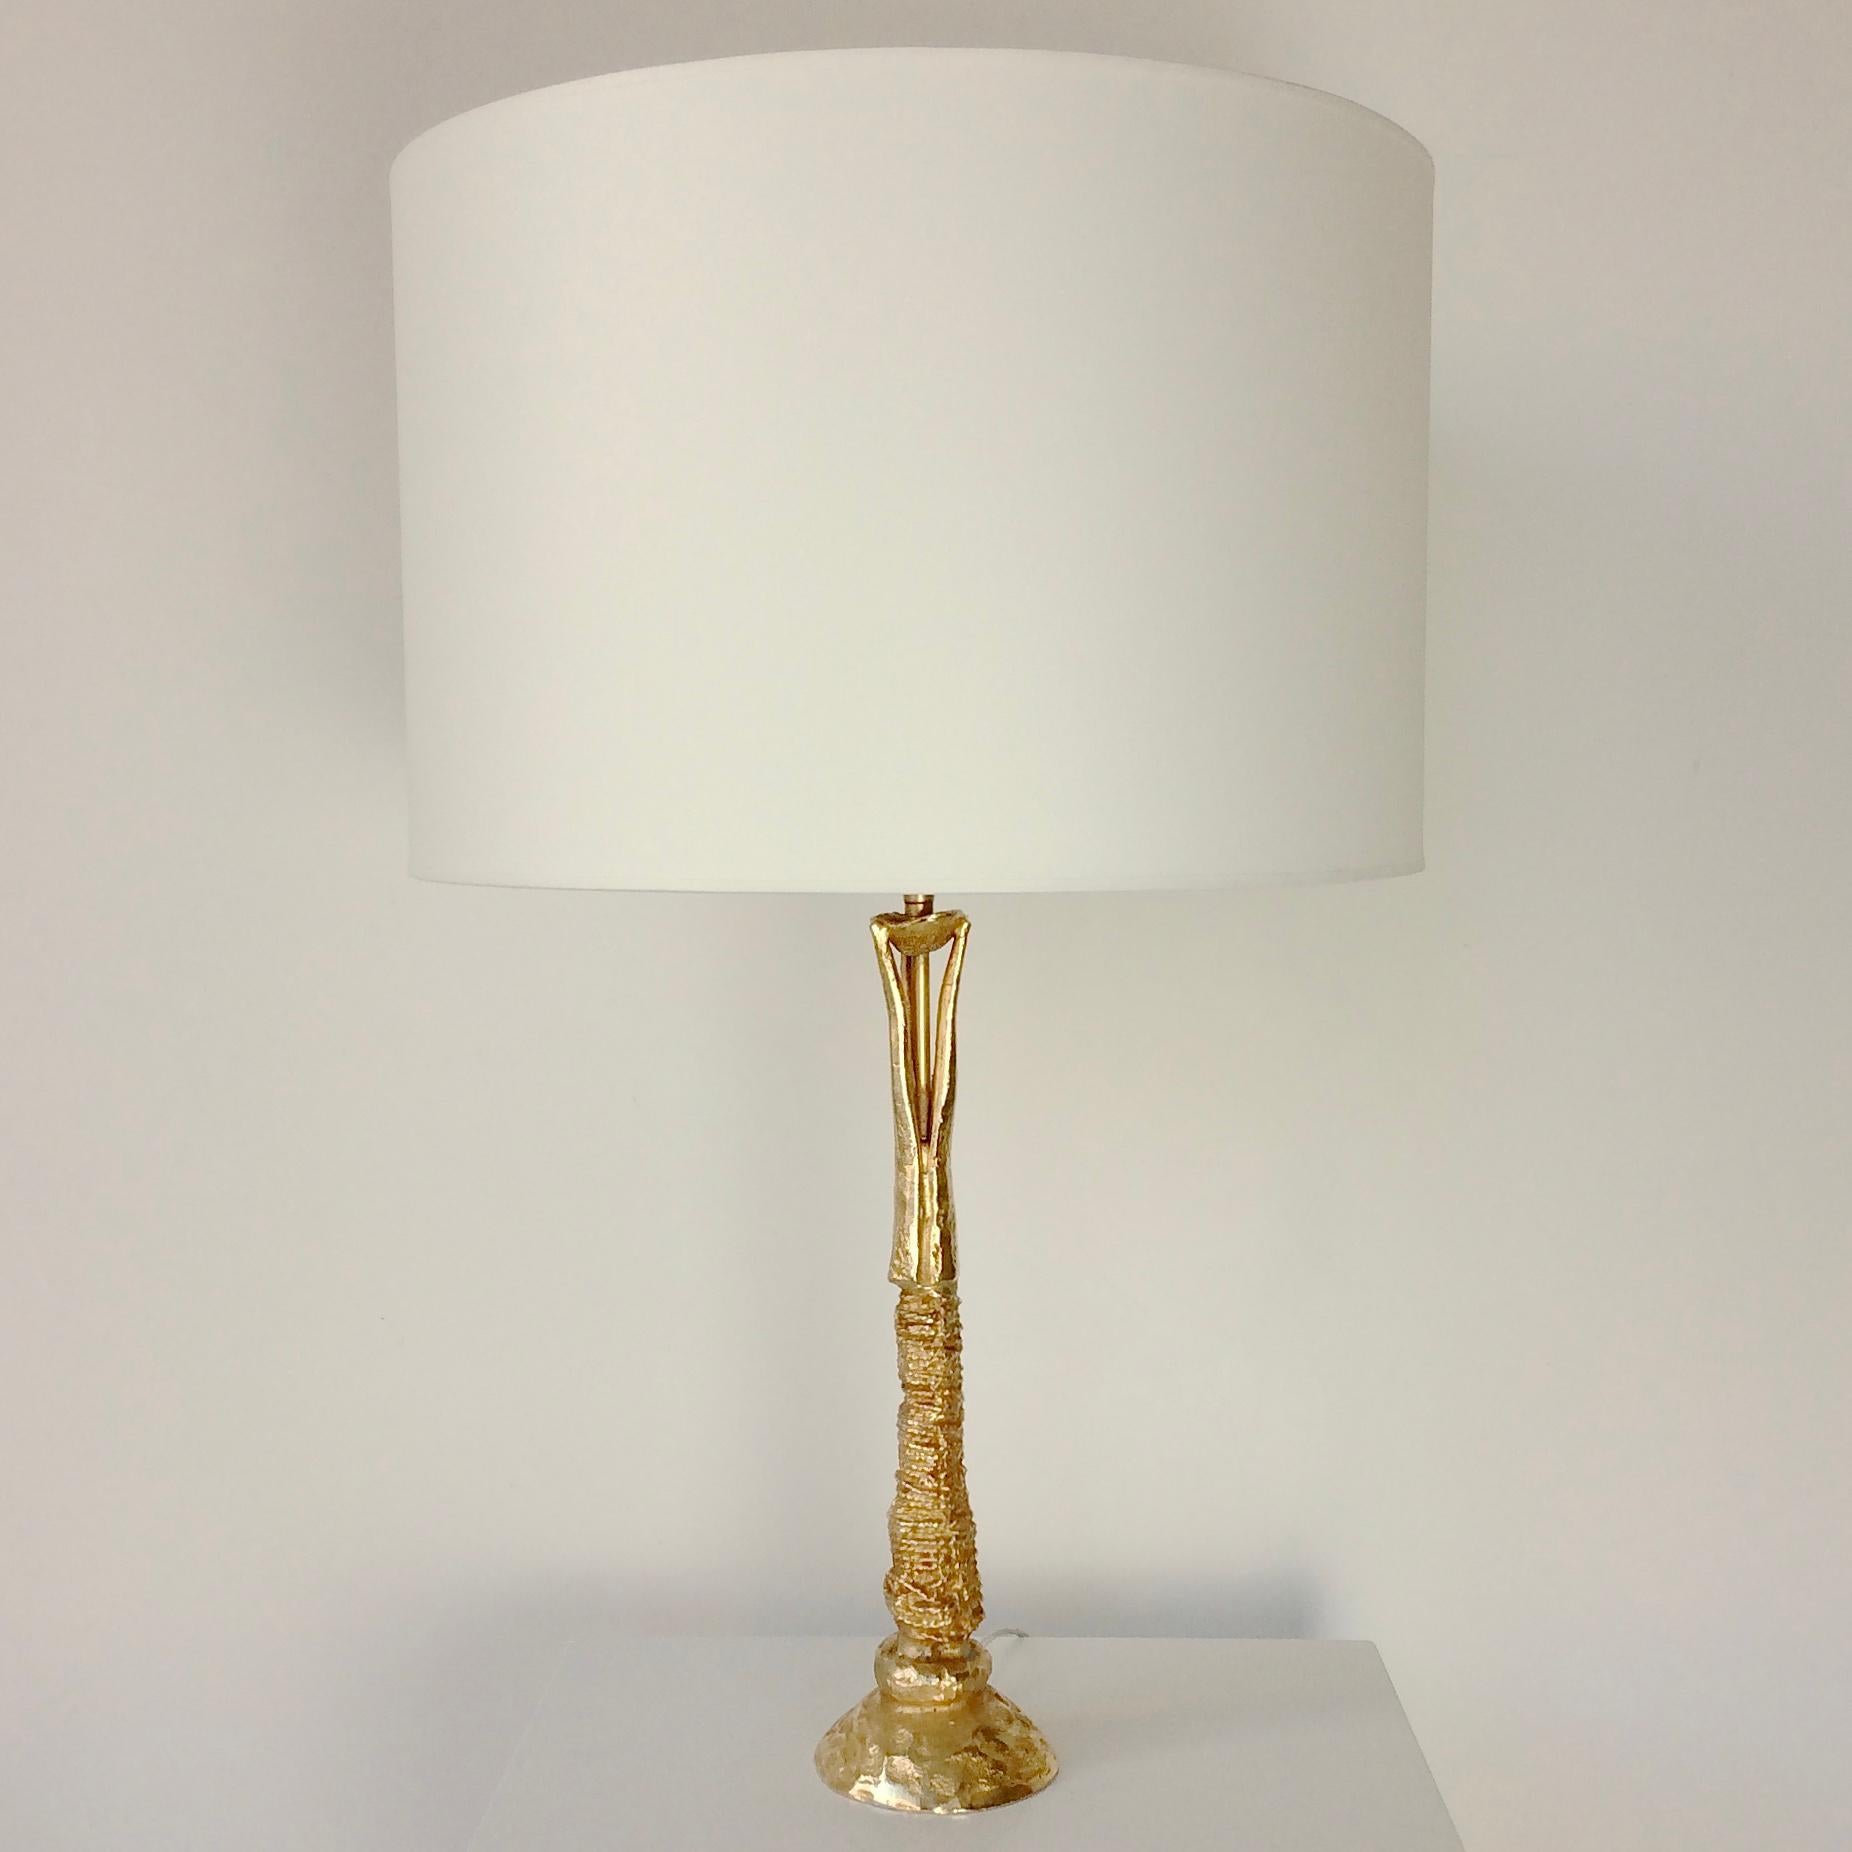 Sculptural table lamp by Pierre Casenove for Fondica, circa 1990, France.
Gilt bronze, new fabric shade.
Rewired. One E27 bulb of 60 W.
Dimensions: total height 68cm, diameter of the shade: 43 cm.
All purchases are covered by our Buyer Protection